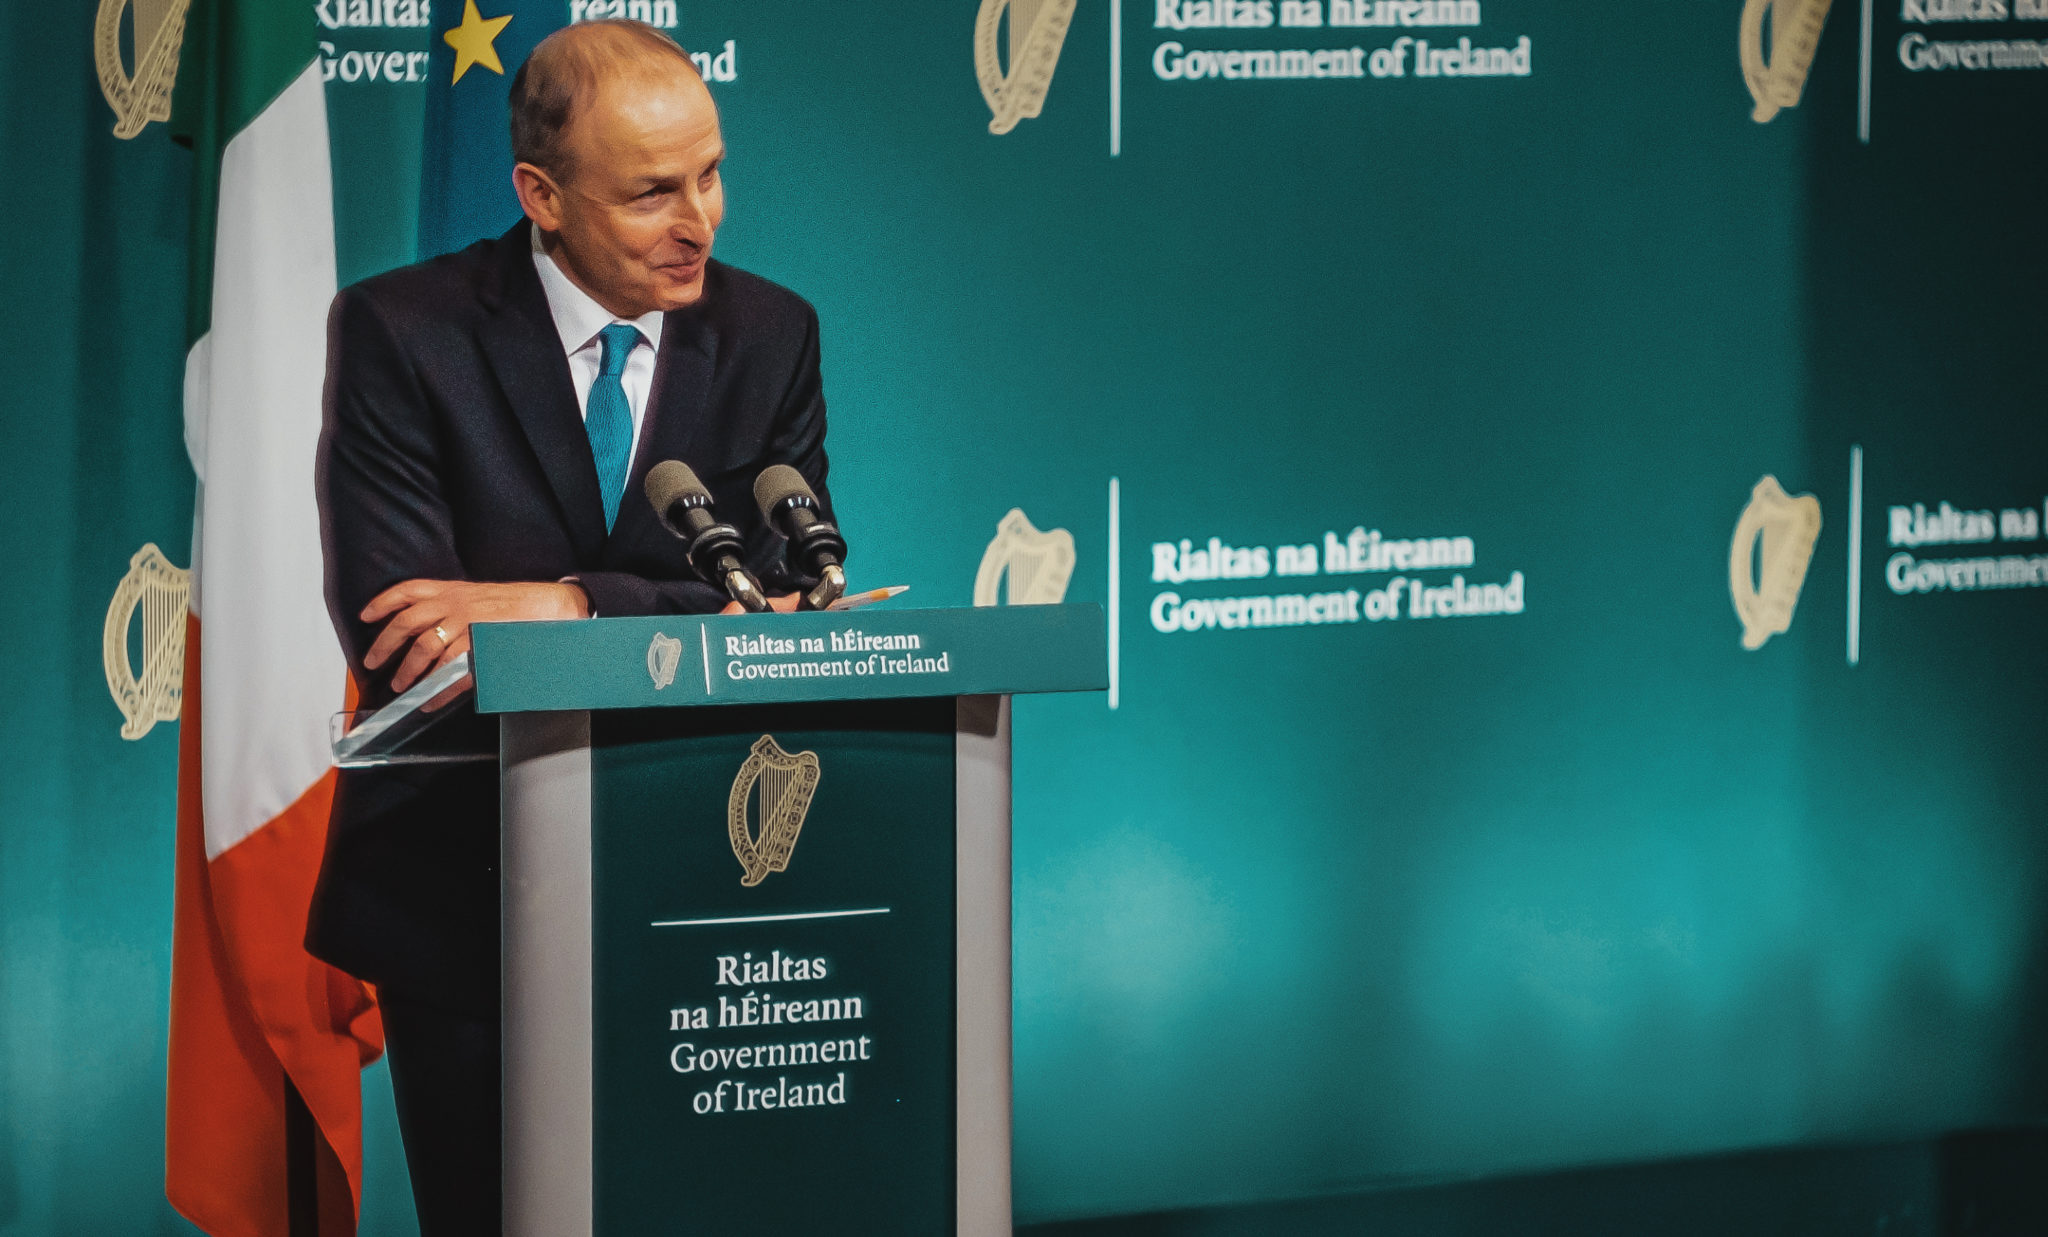 The Taoiseach Micheál Martin at a COVID briefing in Leinster House. Image: Rory Walsh/Newstalk